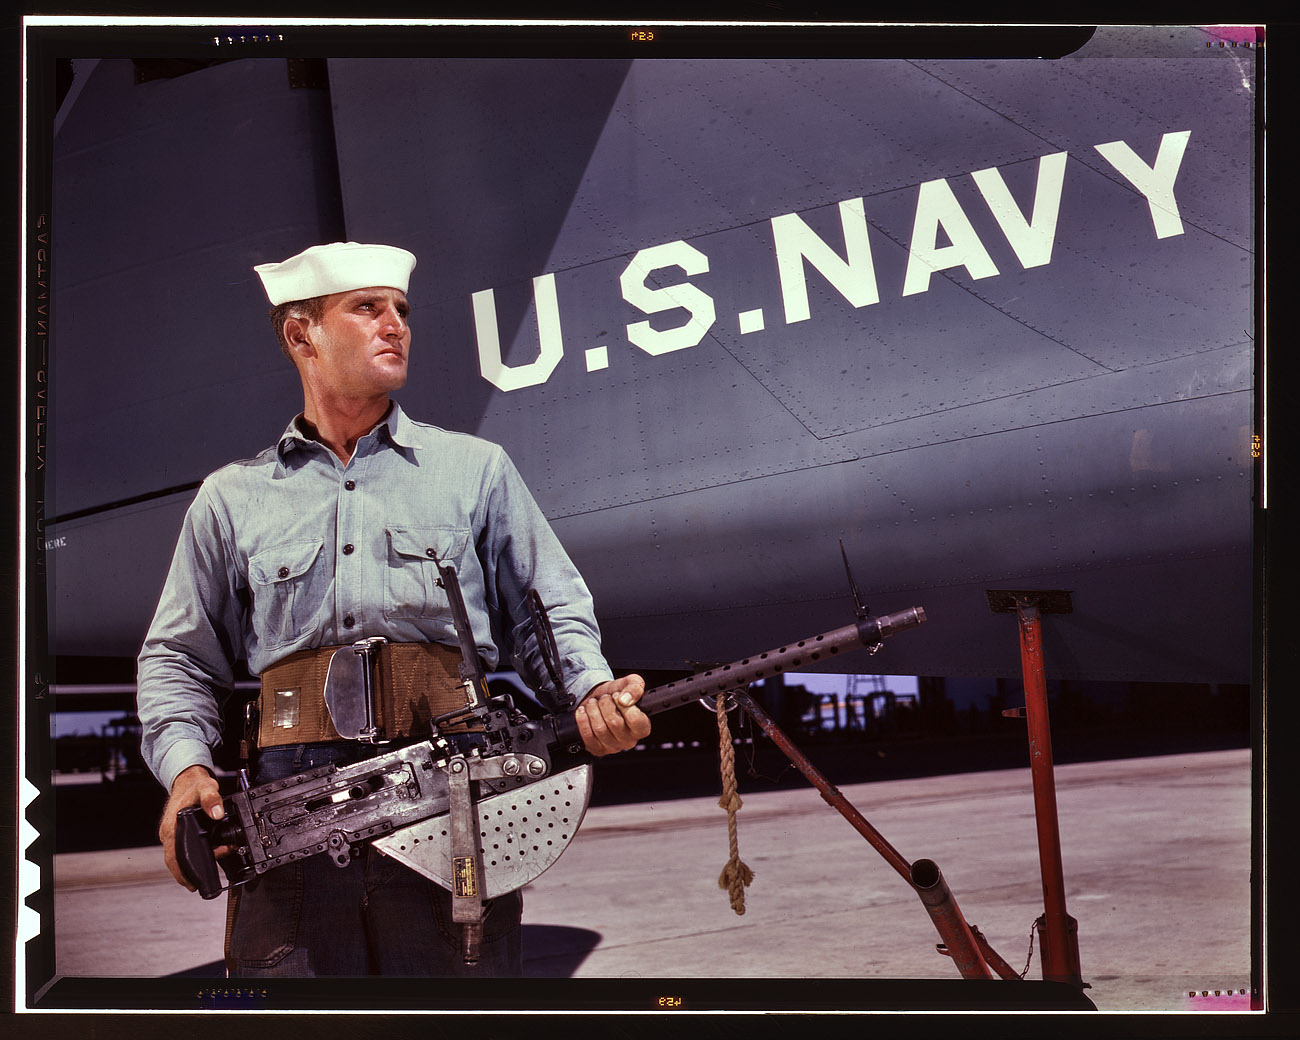 August 1942. Corpus Christi, Texas. "After seven years in the Navy, J.D. Estes is considered an old sea salt by his mates at the Naval Air Base." View full size. 4x5 Kodachrome transparency by Howard Hollem, Office of War Information.